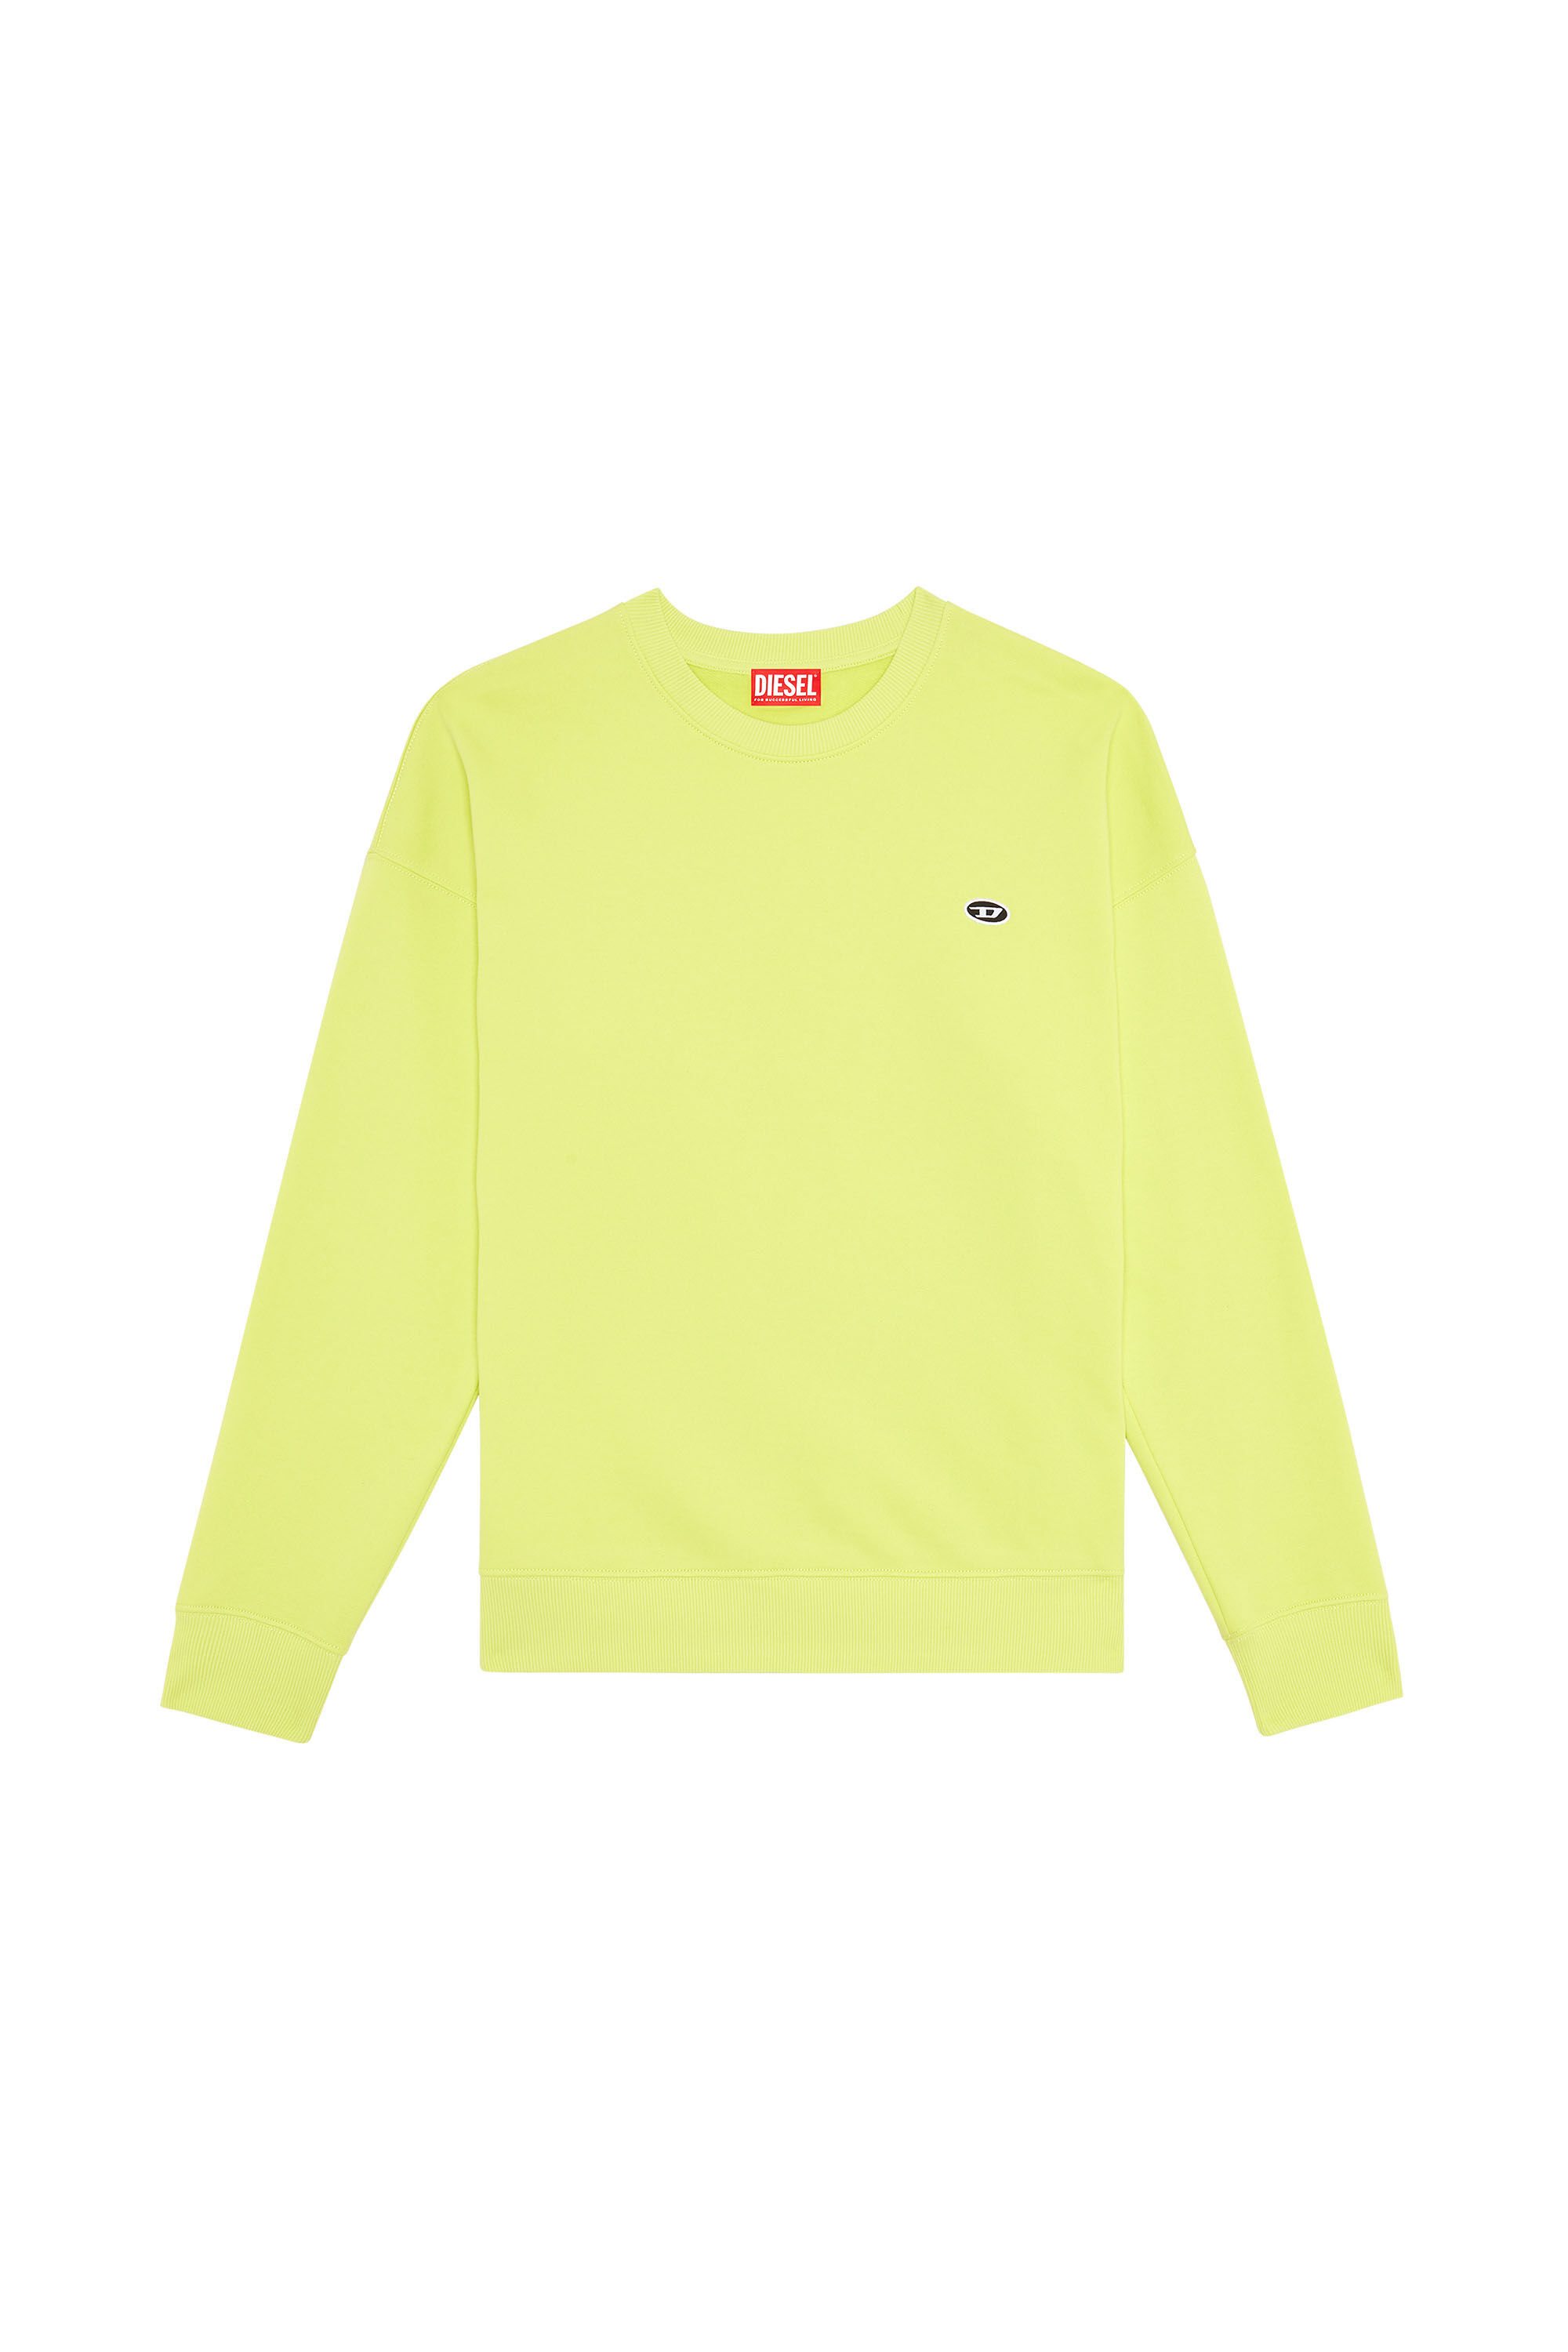 Diesel - S-ROB-DOVAL-PJ, Yellow Fluo - Image 2